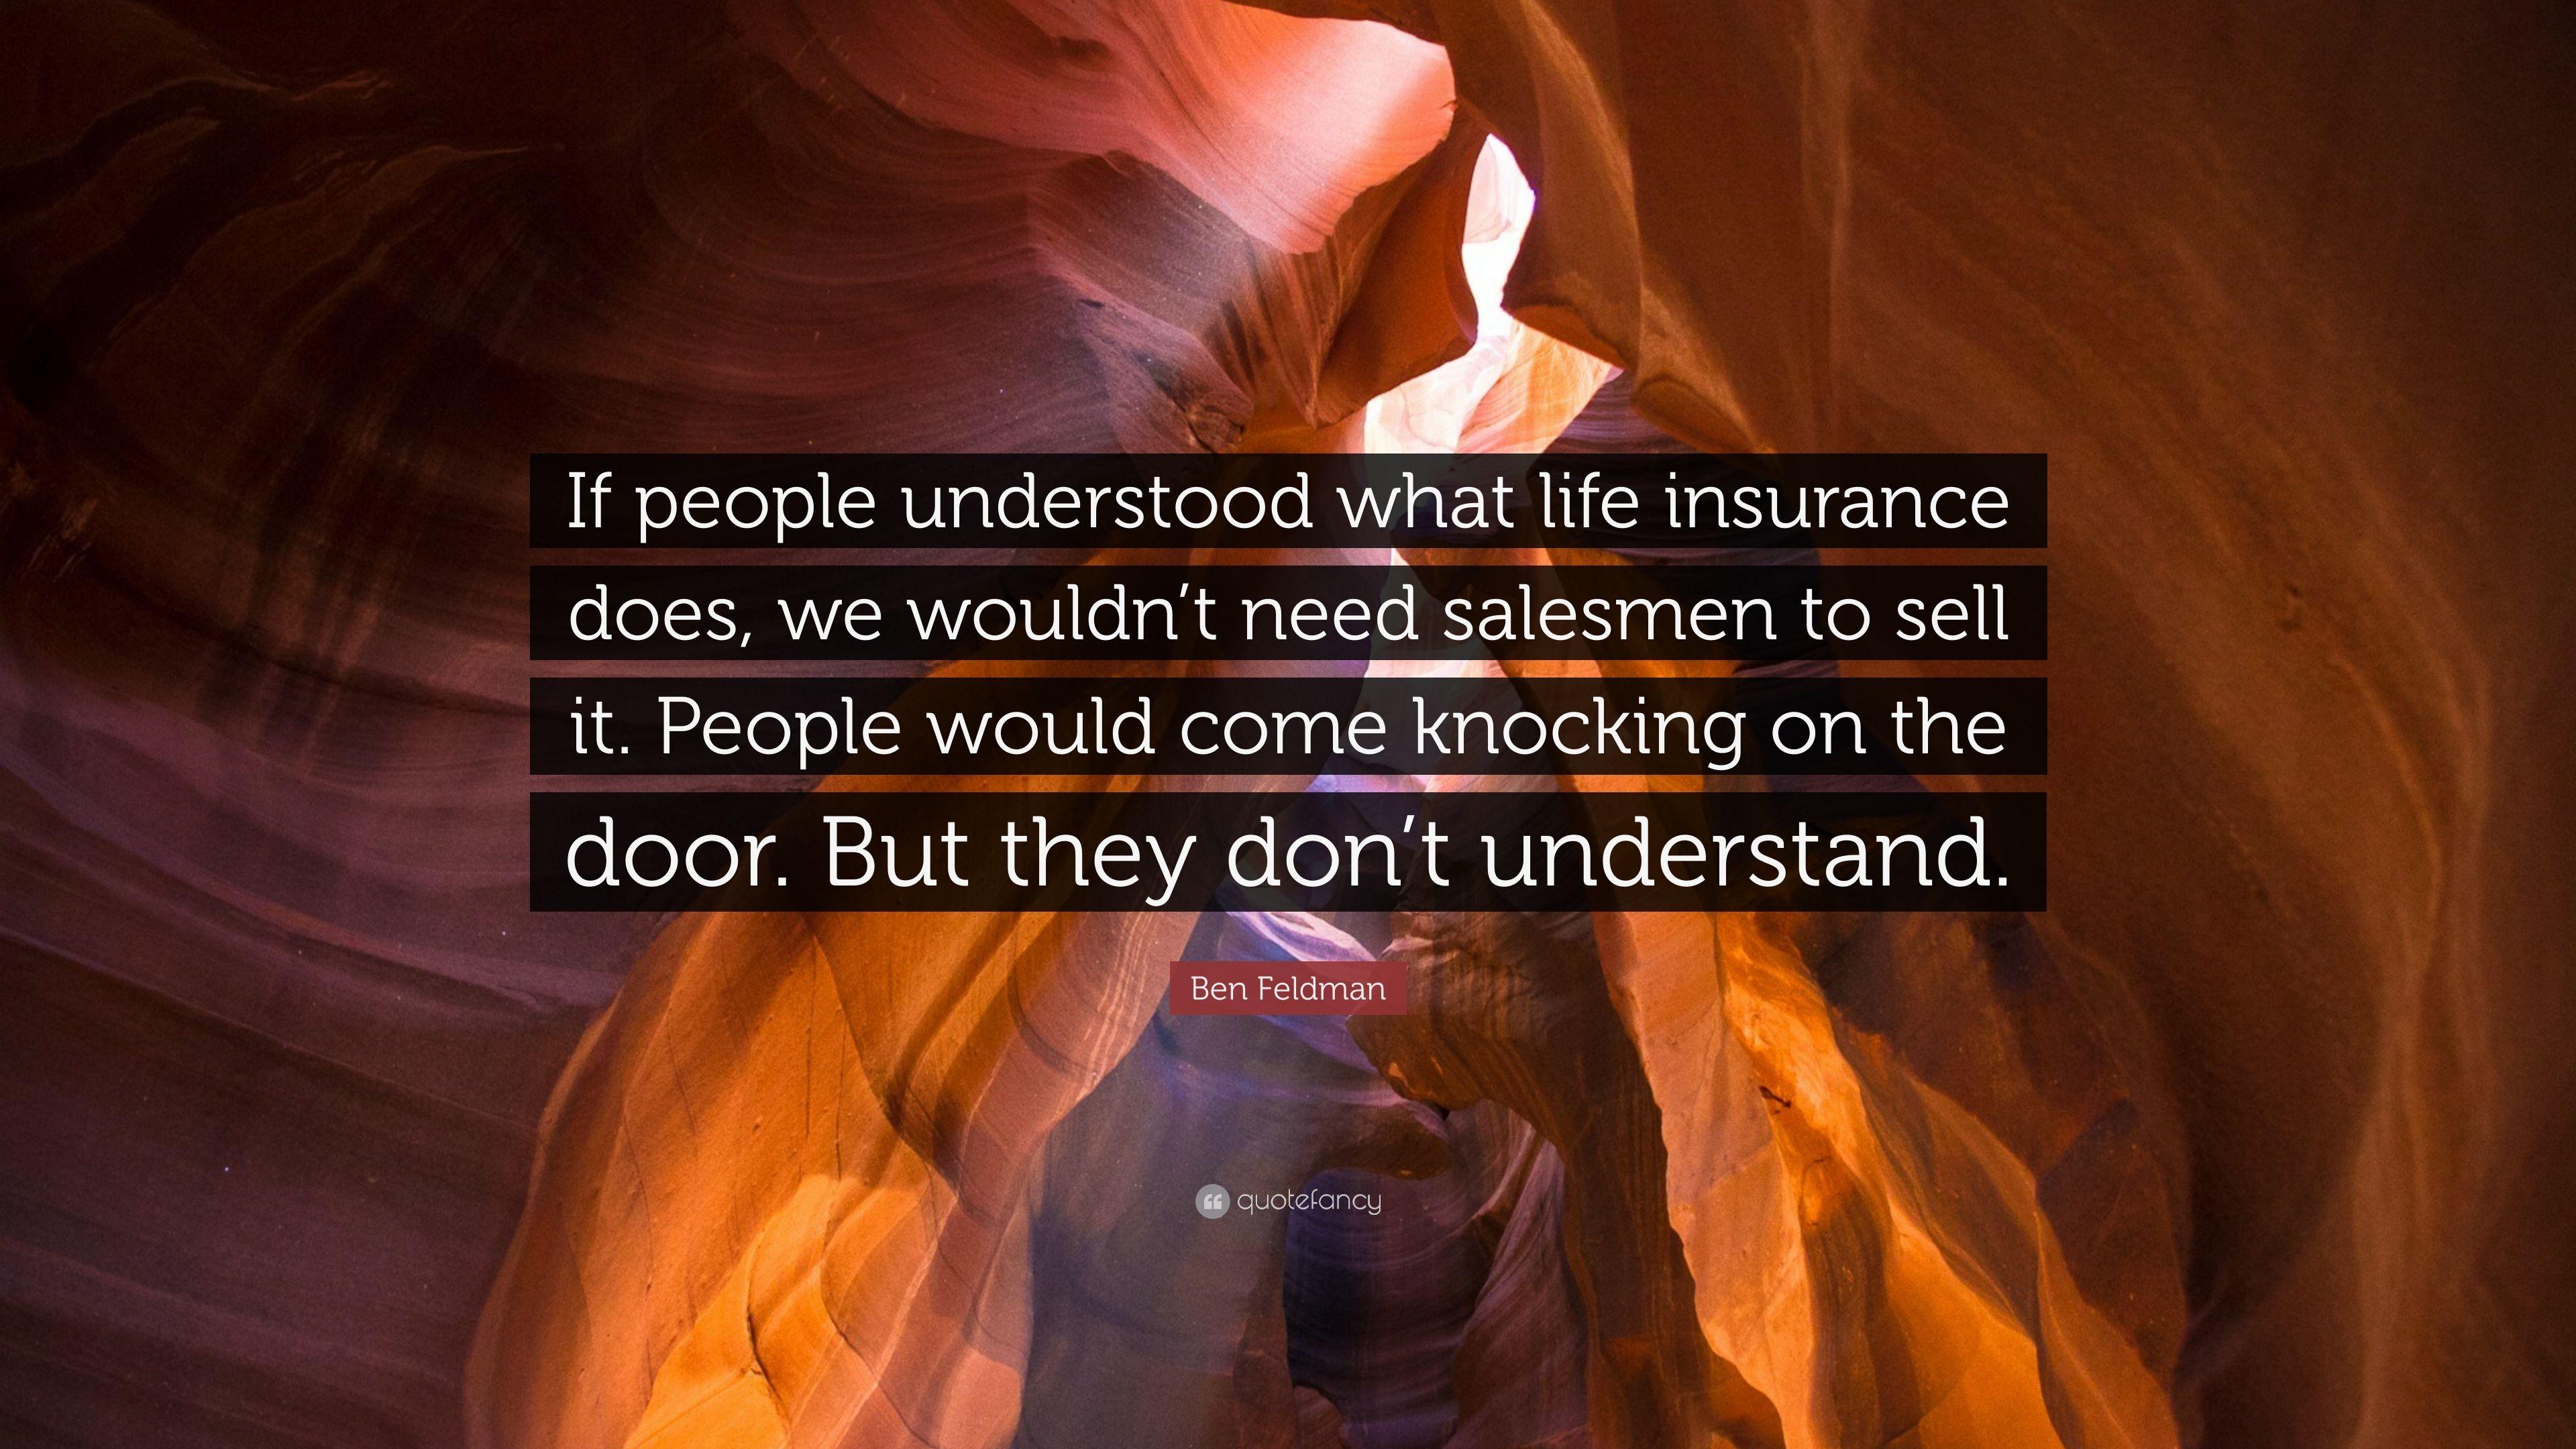 Ben Feldman Quote: “If people understood what life insurance does